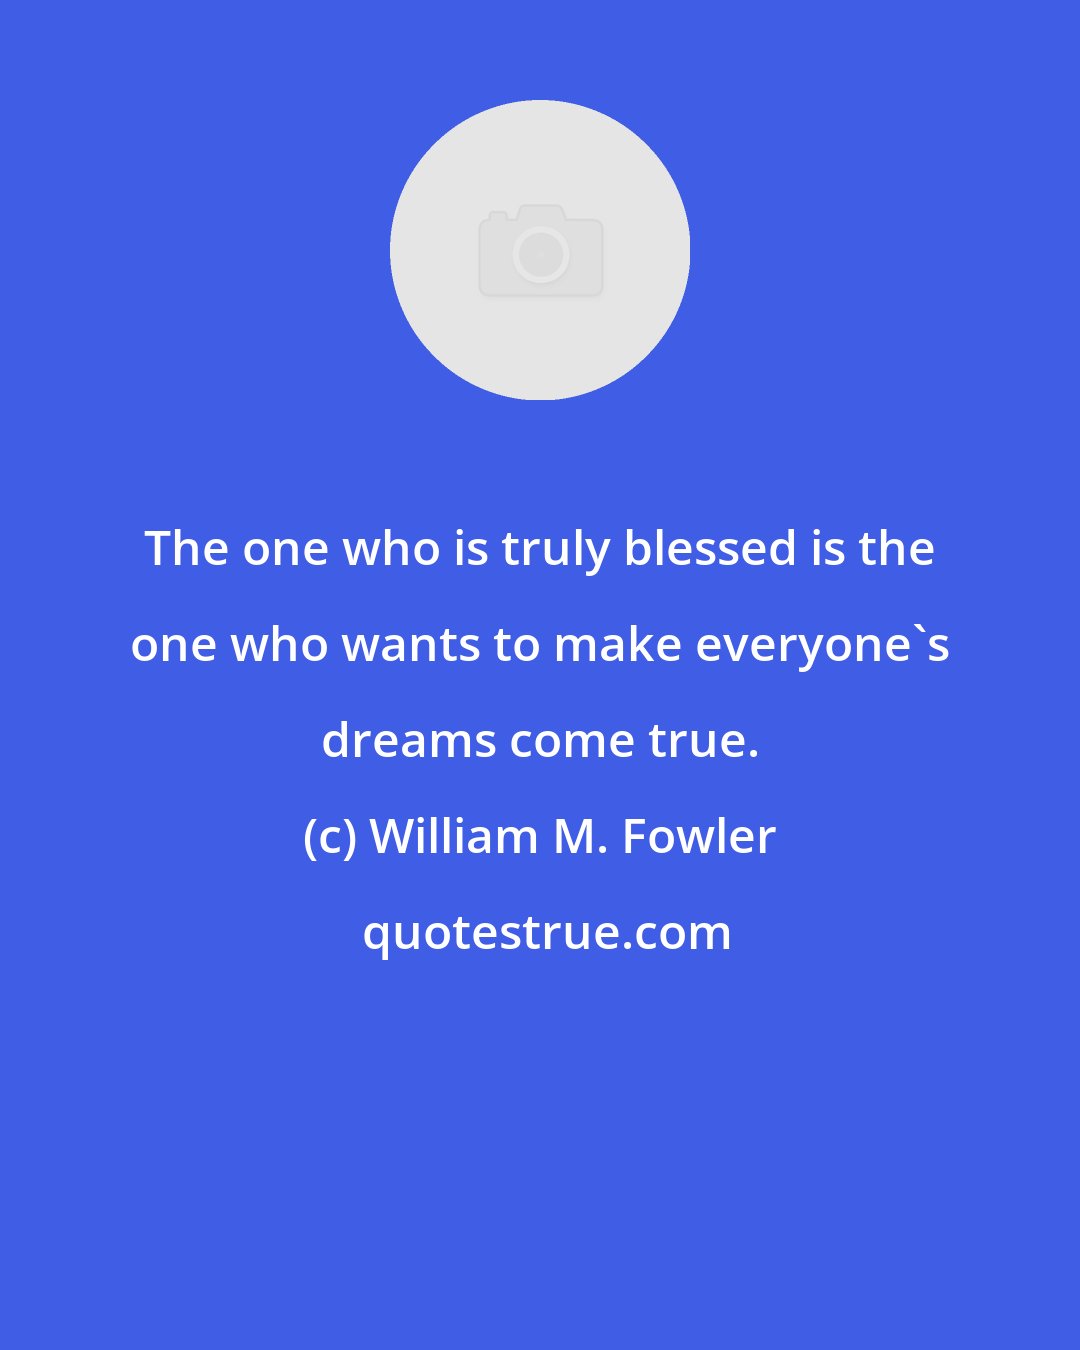 William M. Fowler: The one who is truly blessed is the one who wants to make everyone's dreams come true.